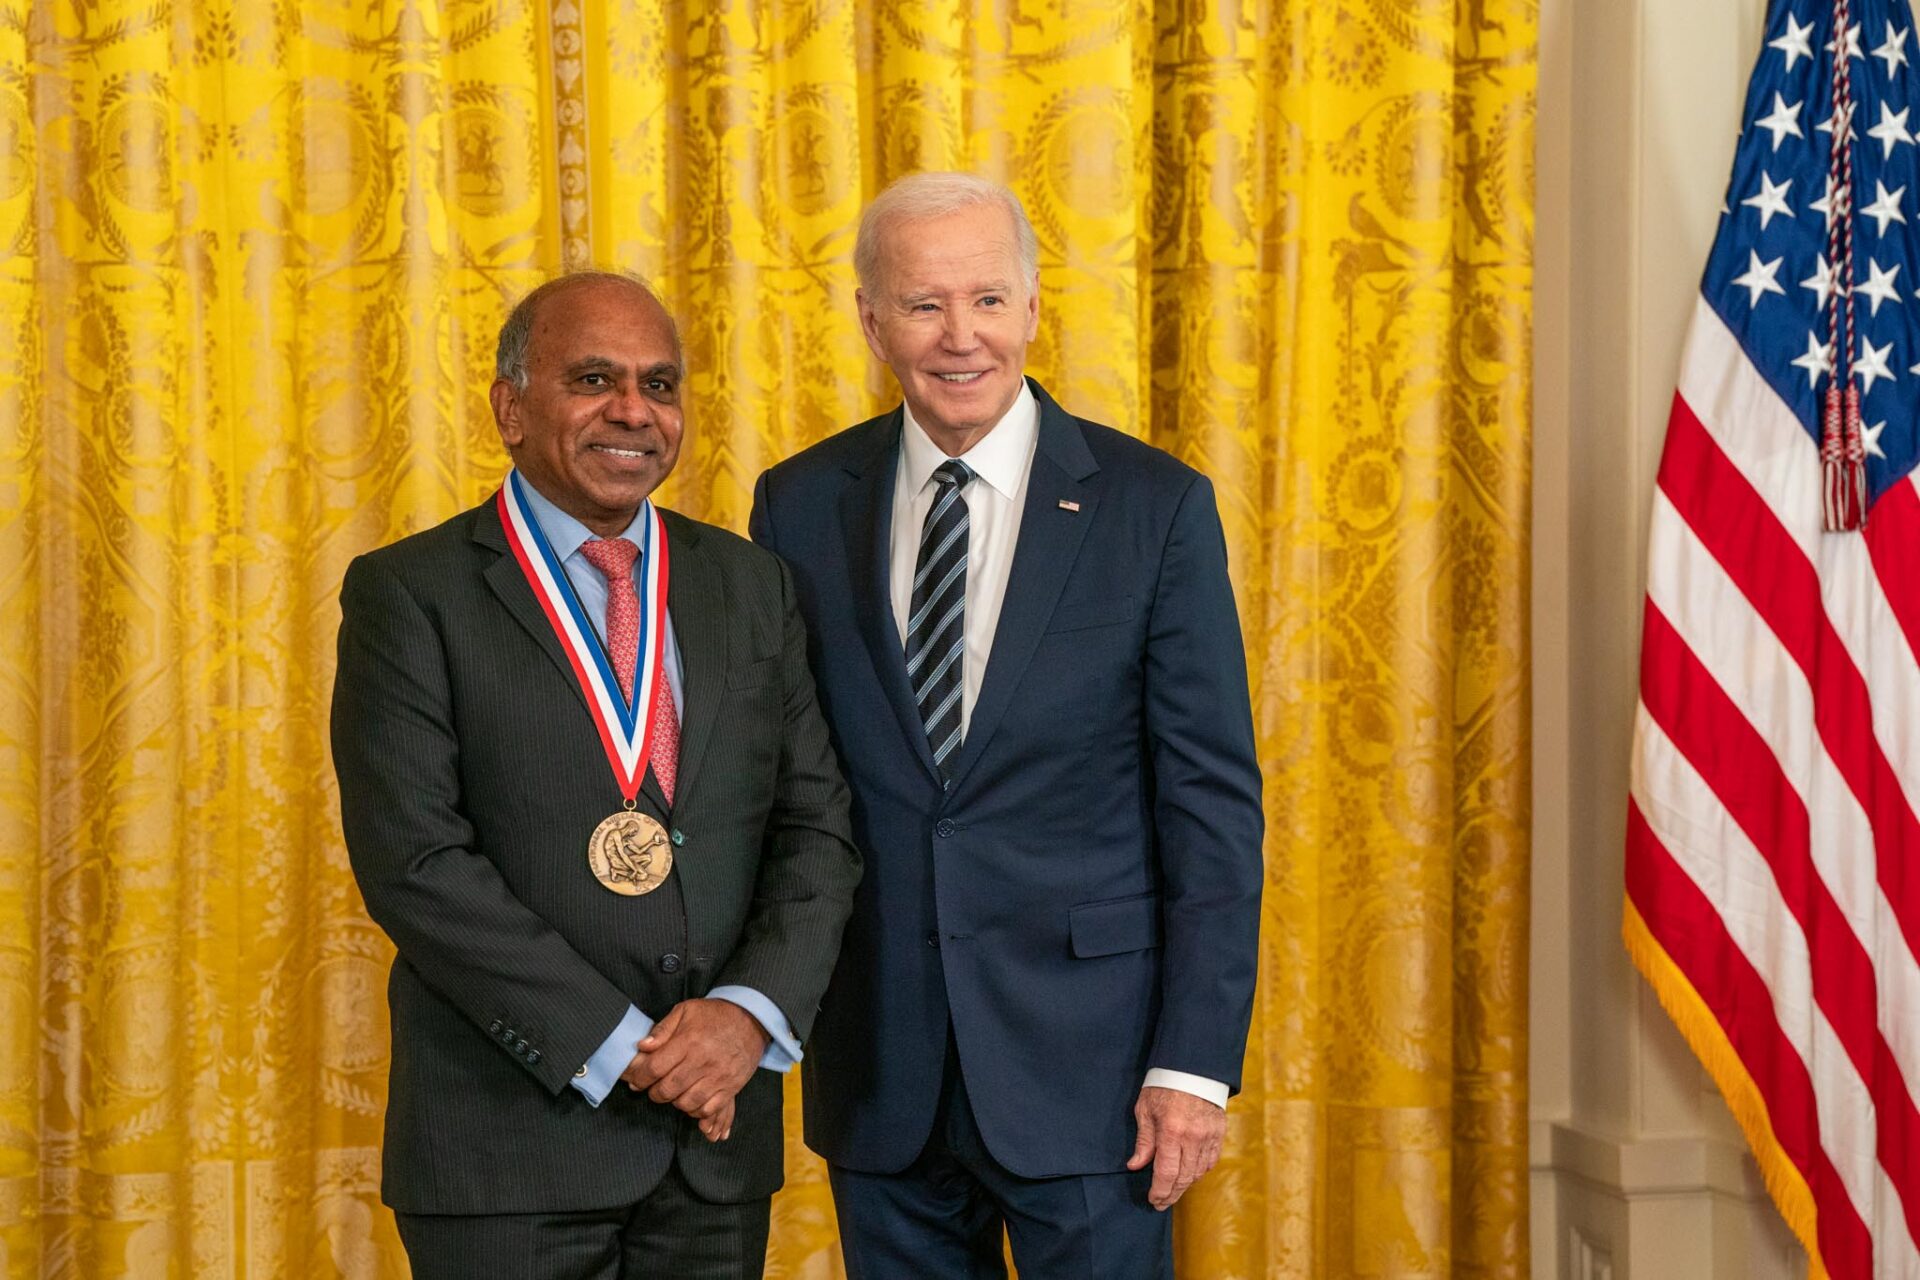 President Biden Awards the National Medal of Science to Prof. Subra Suresh